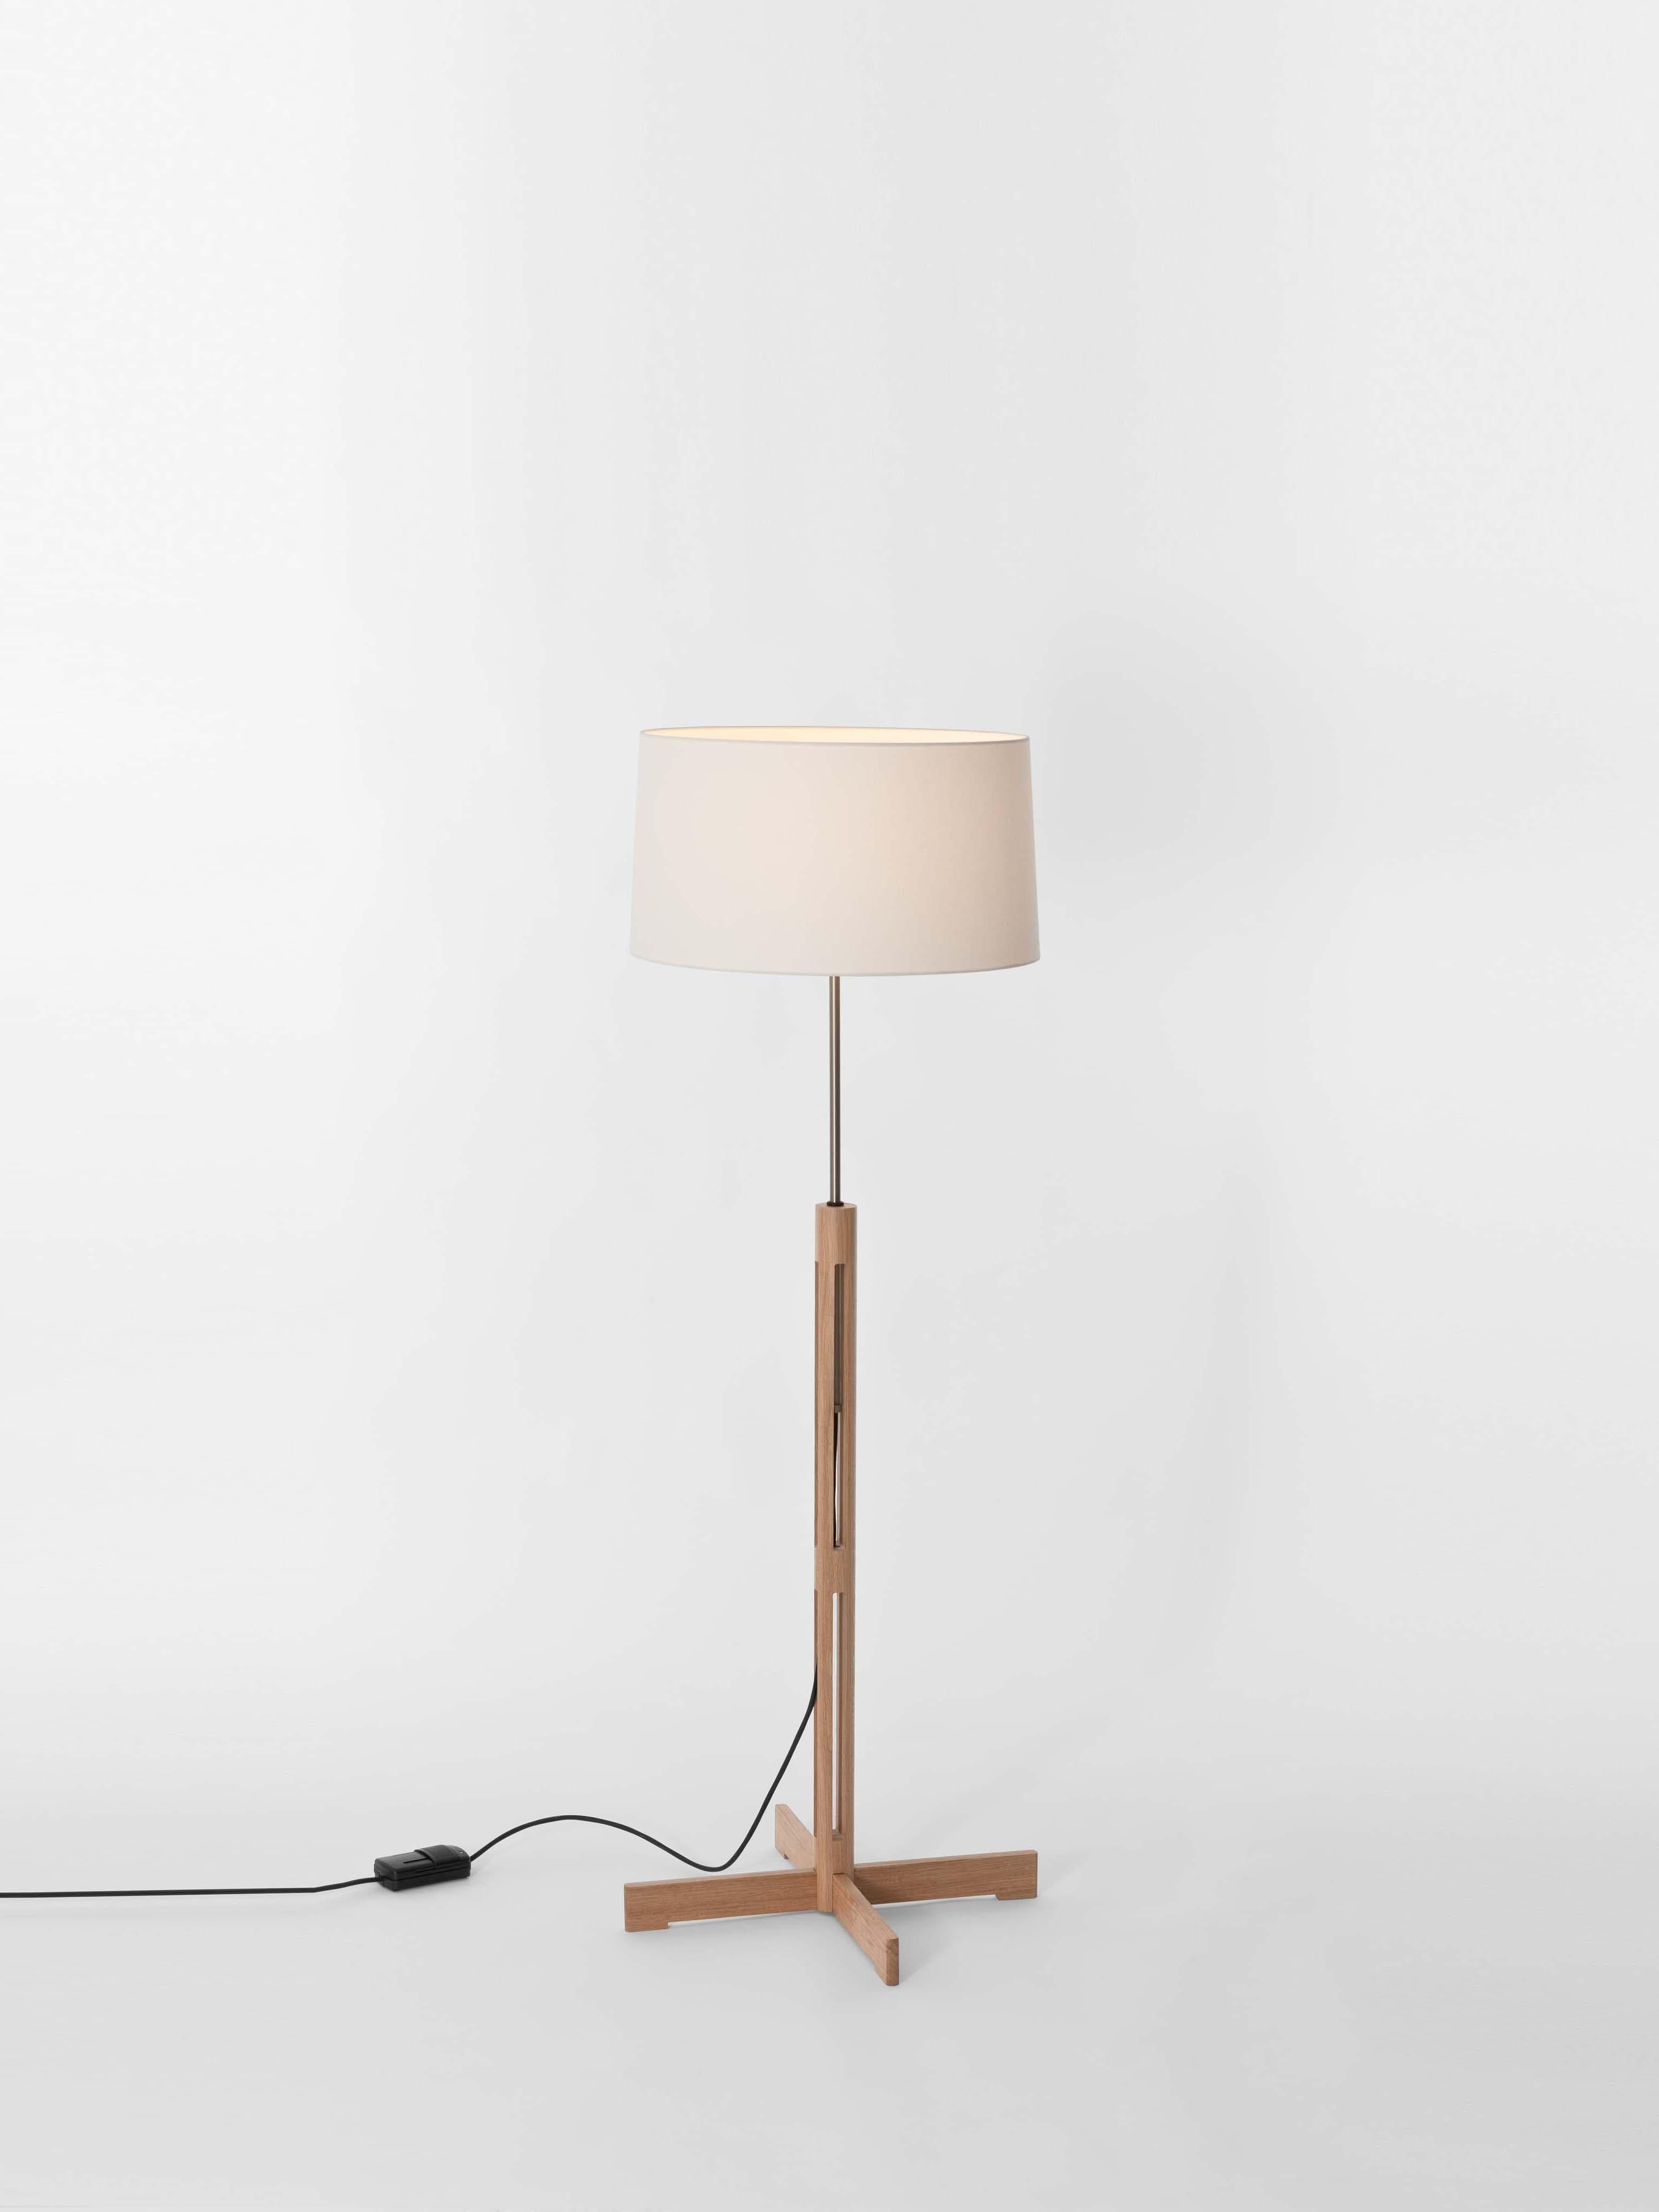 FAD floor lamp by Miguel Milá
Dimensions: D 45 x H 120-150 cm
Materials: Oak wood, linen.
Non height-adjustable version available.

Miguel Milá got everything right compositionally with this demonstration of industrial craftsmanship. Its